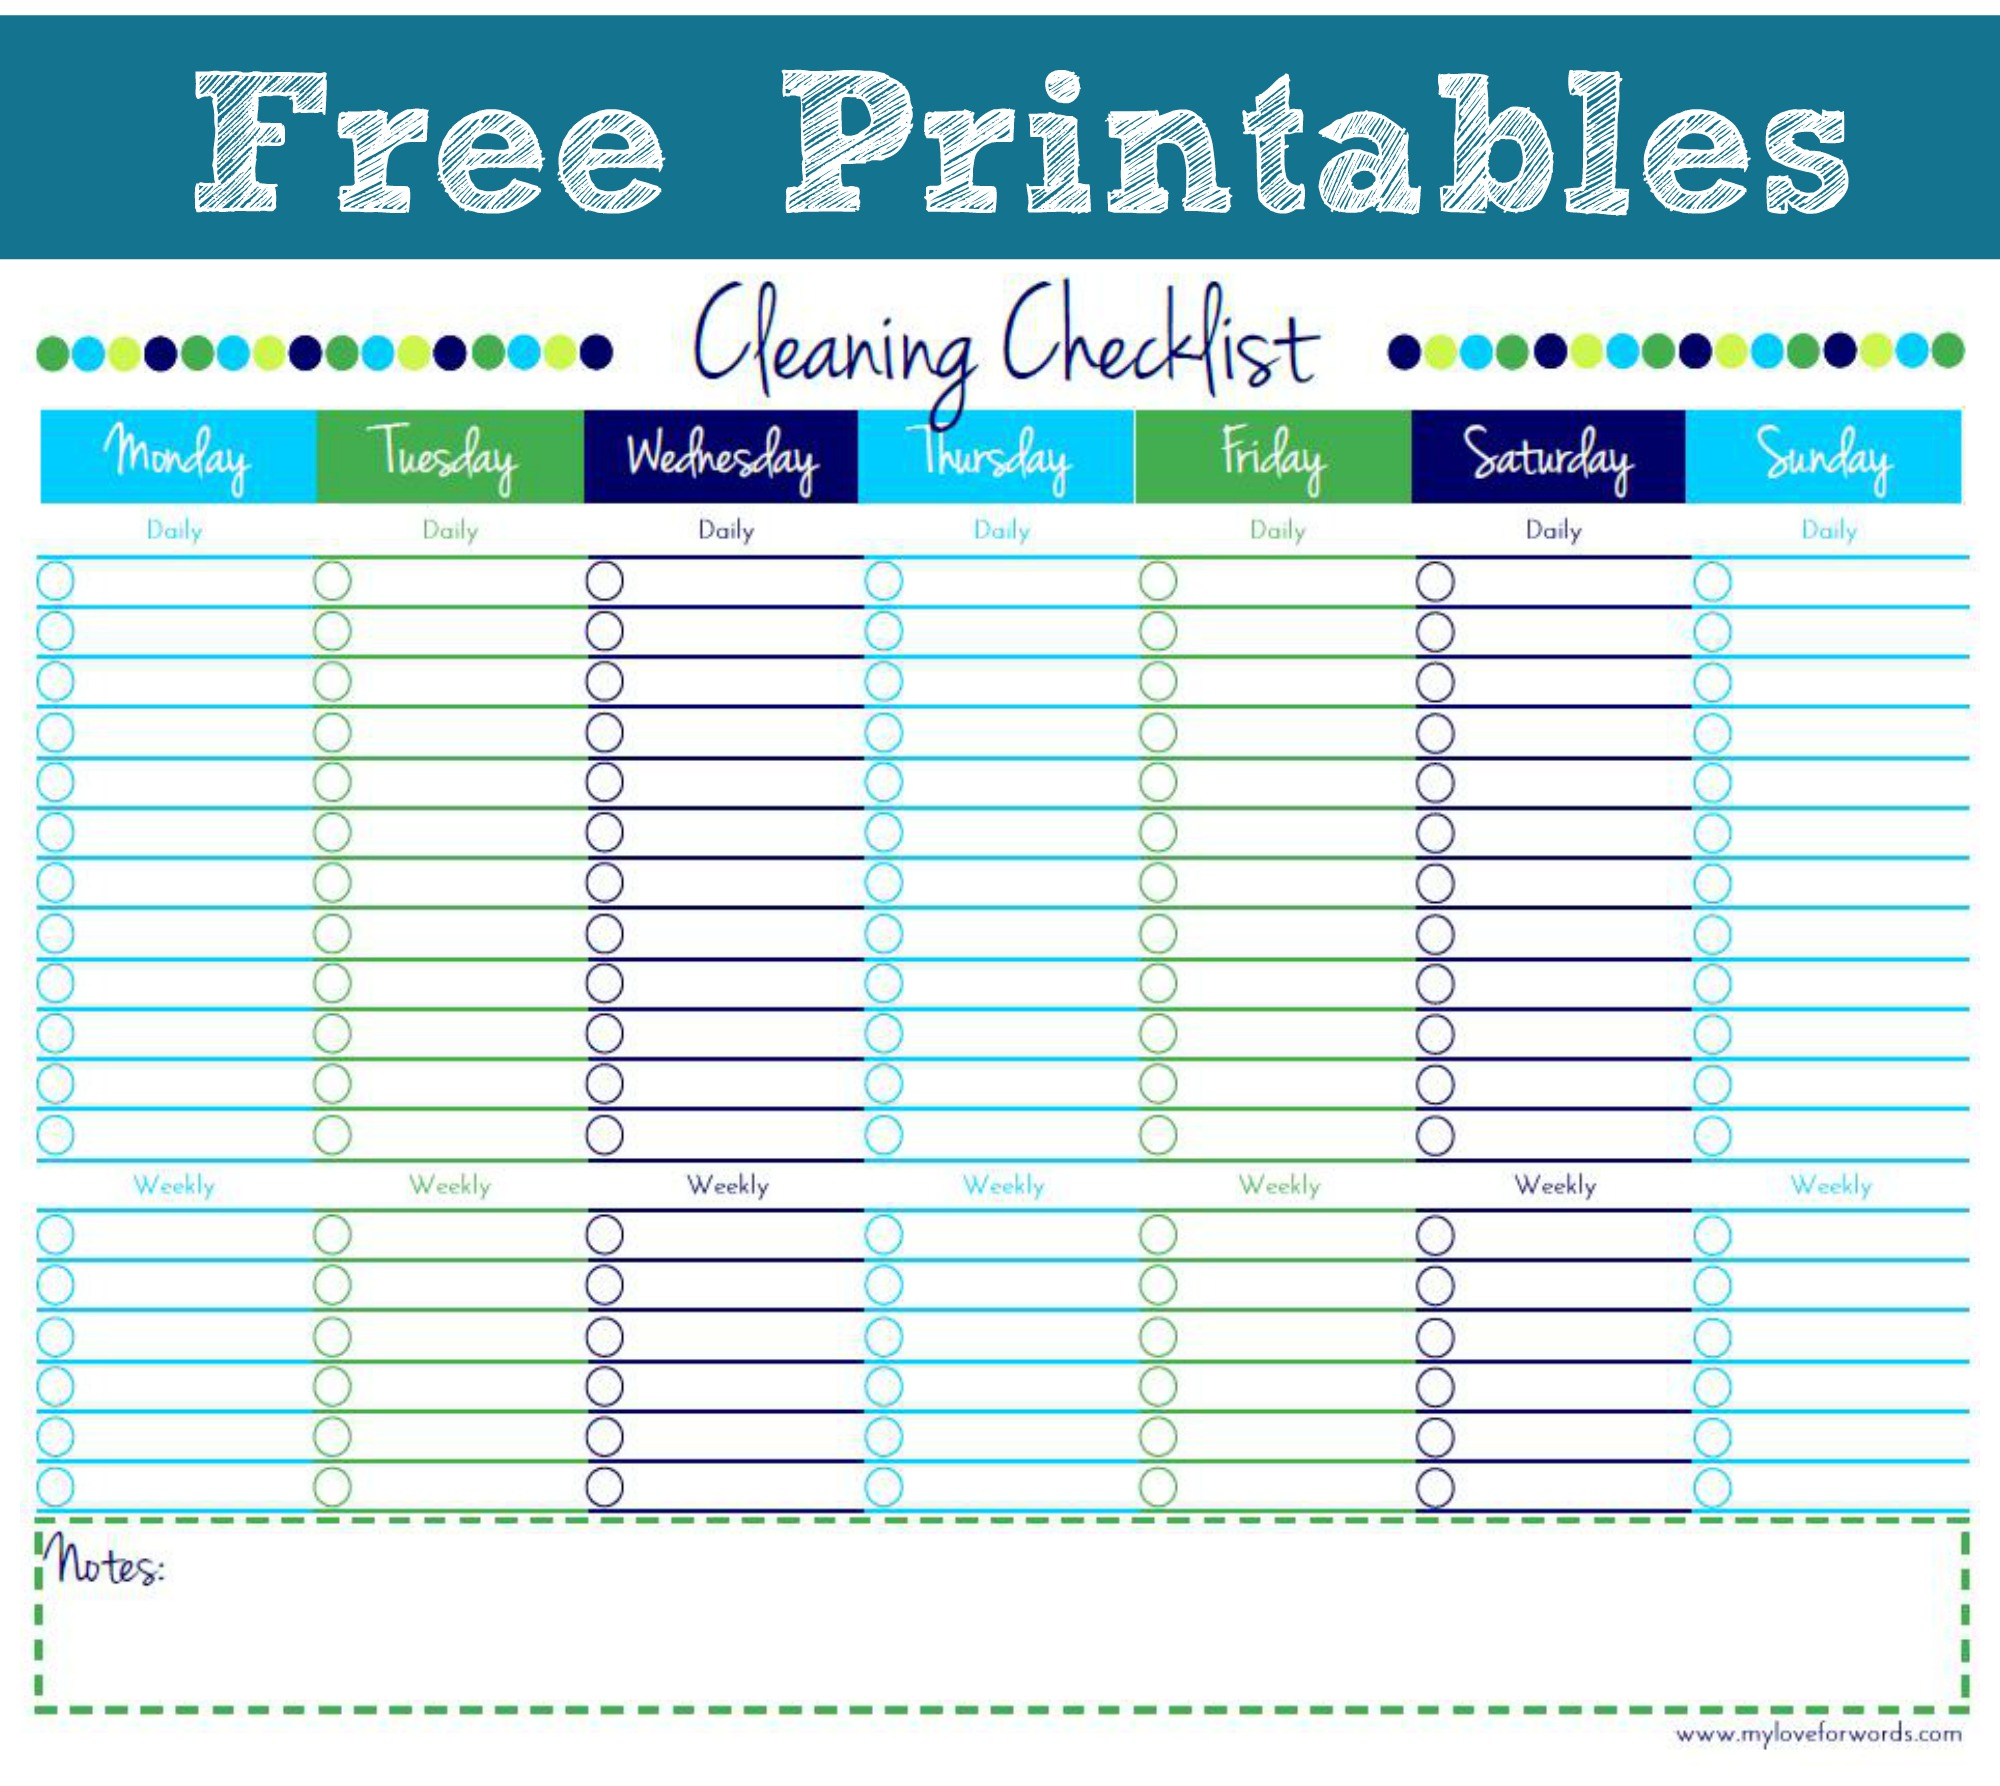 Cleaning Checklist {Free Printable}